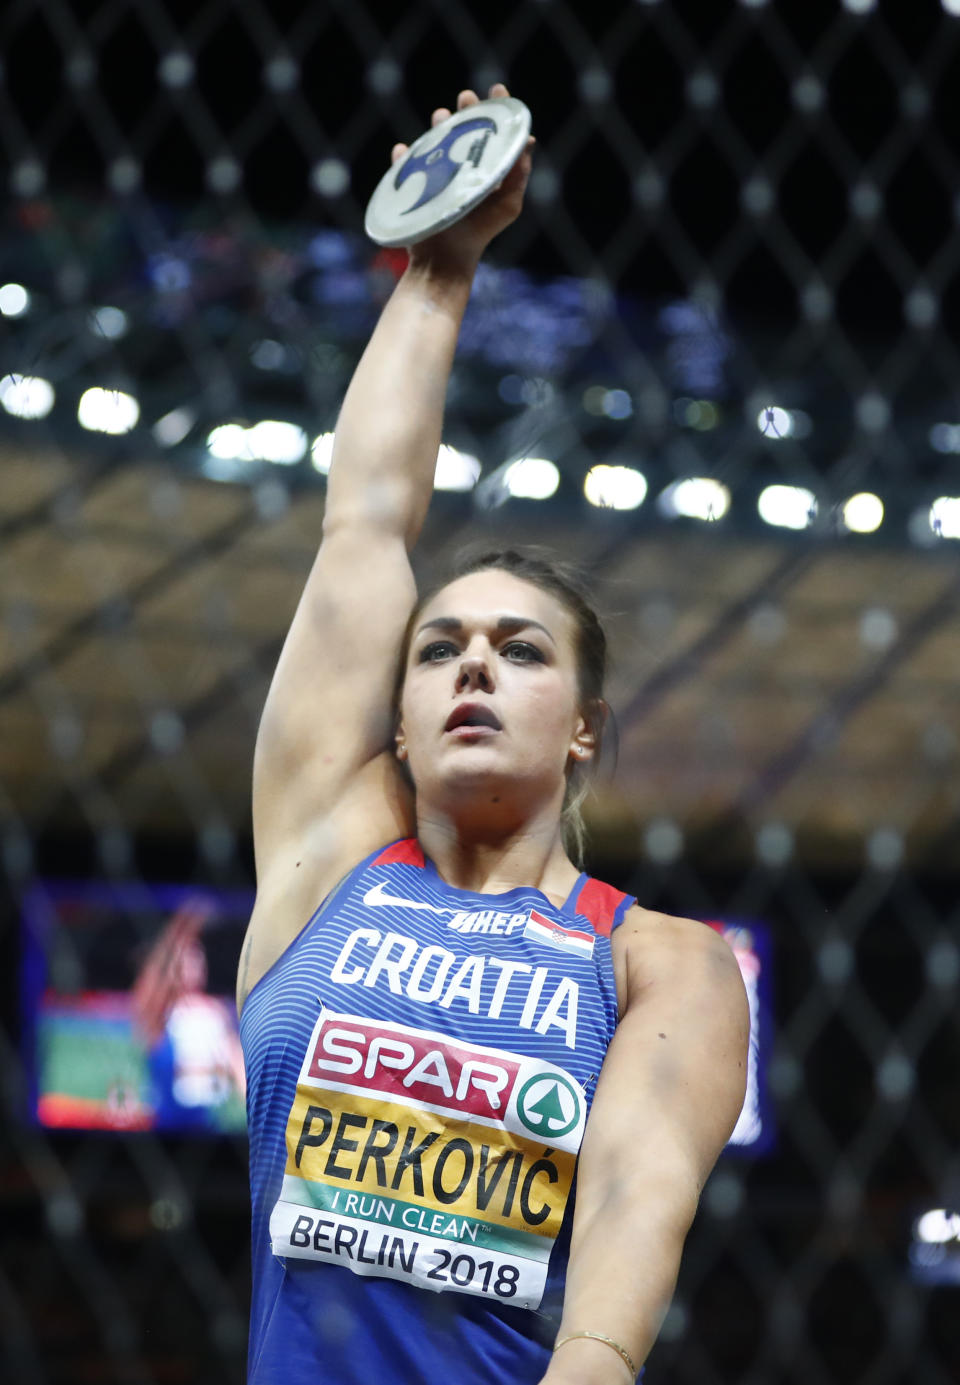 Croatia's Sandra Perkovic makes an attempt in the women's discus throw final at the European Athletics Championships at the Olympic stadium in Berlin, Germany, Saturday, Aug. 11, 2018. (AP Photo/Matthias Schrader)